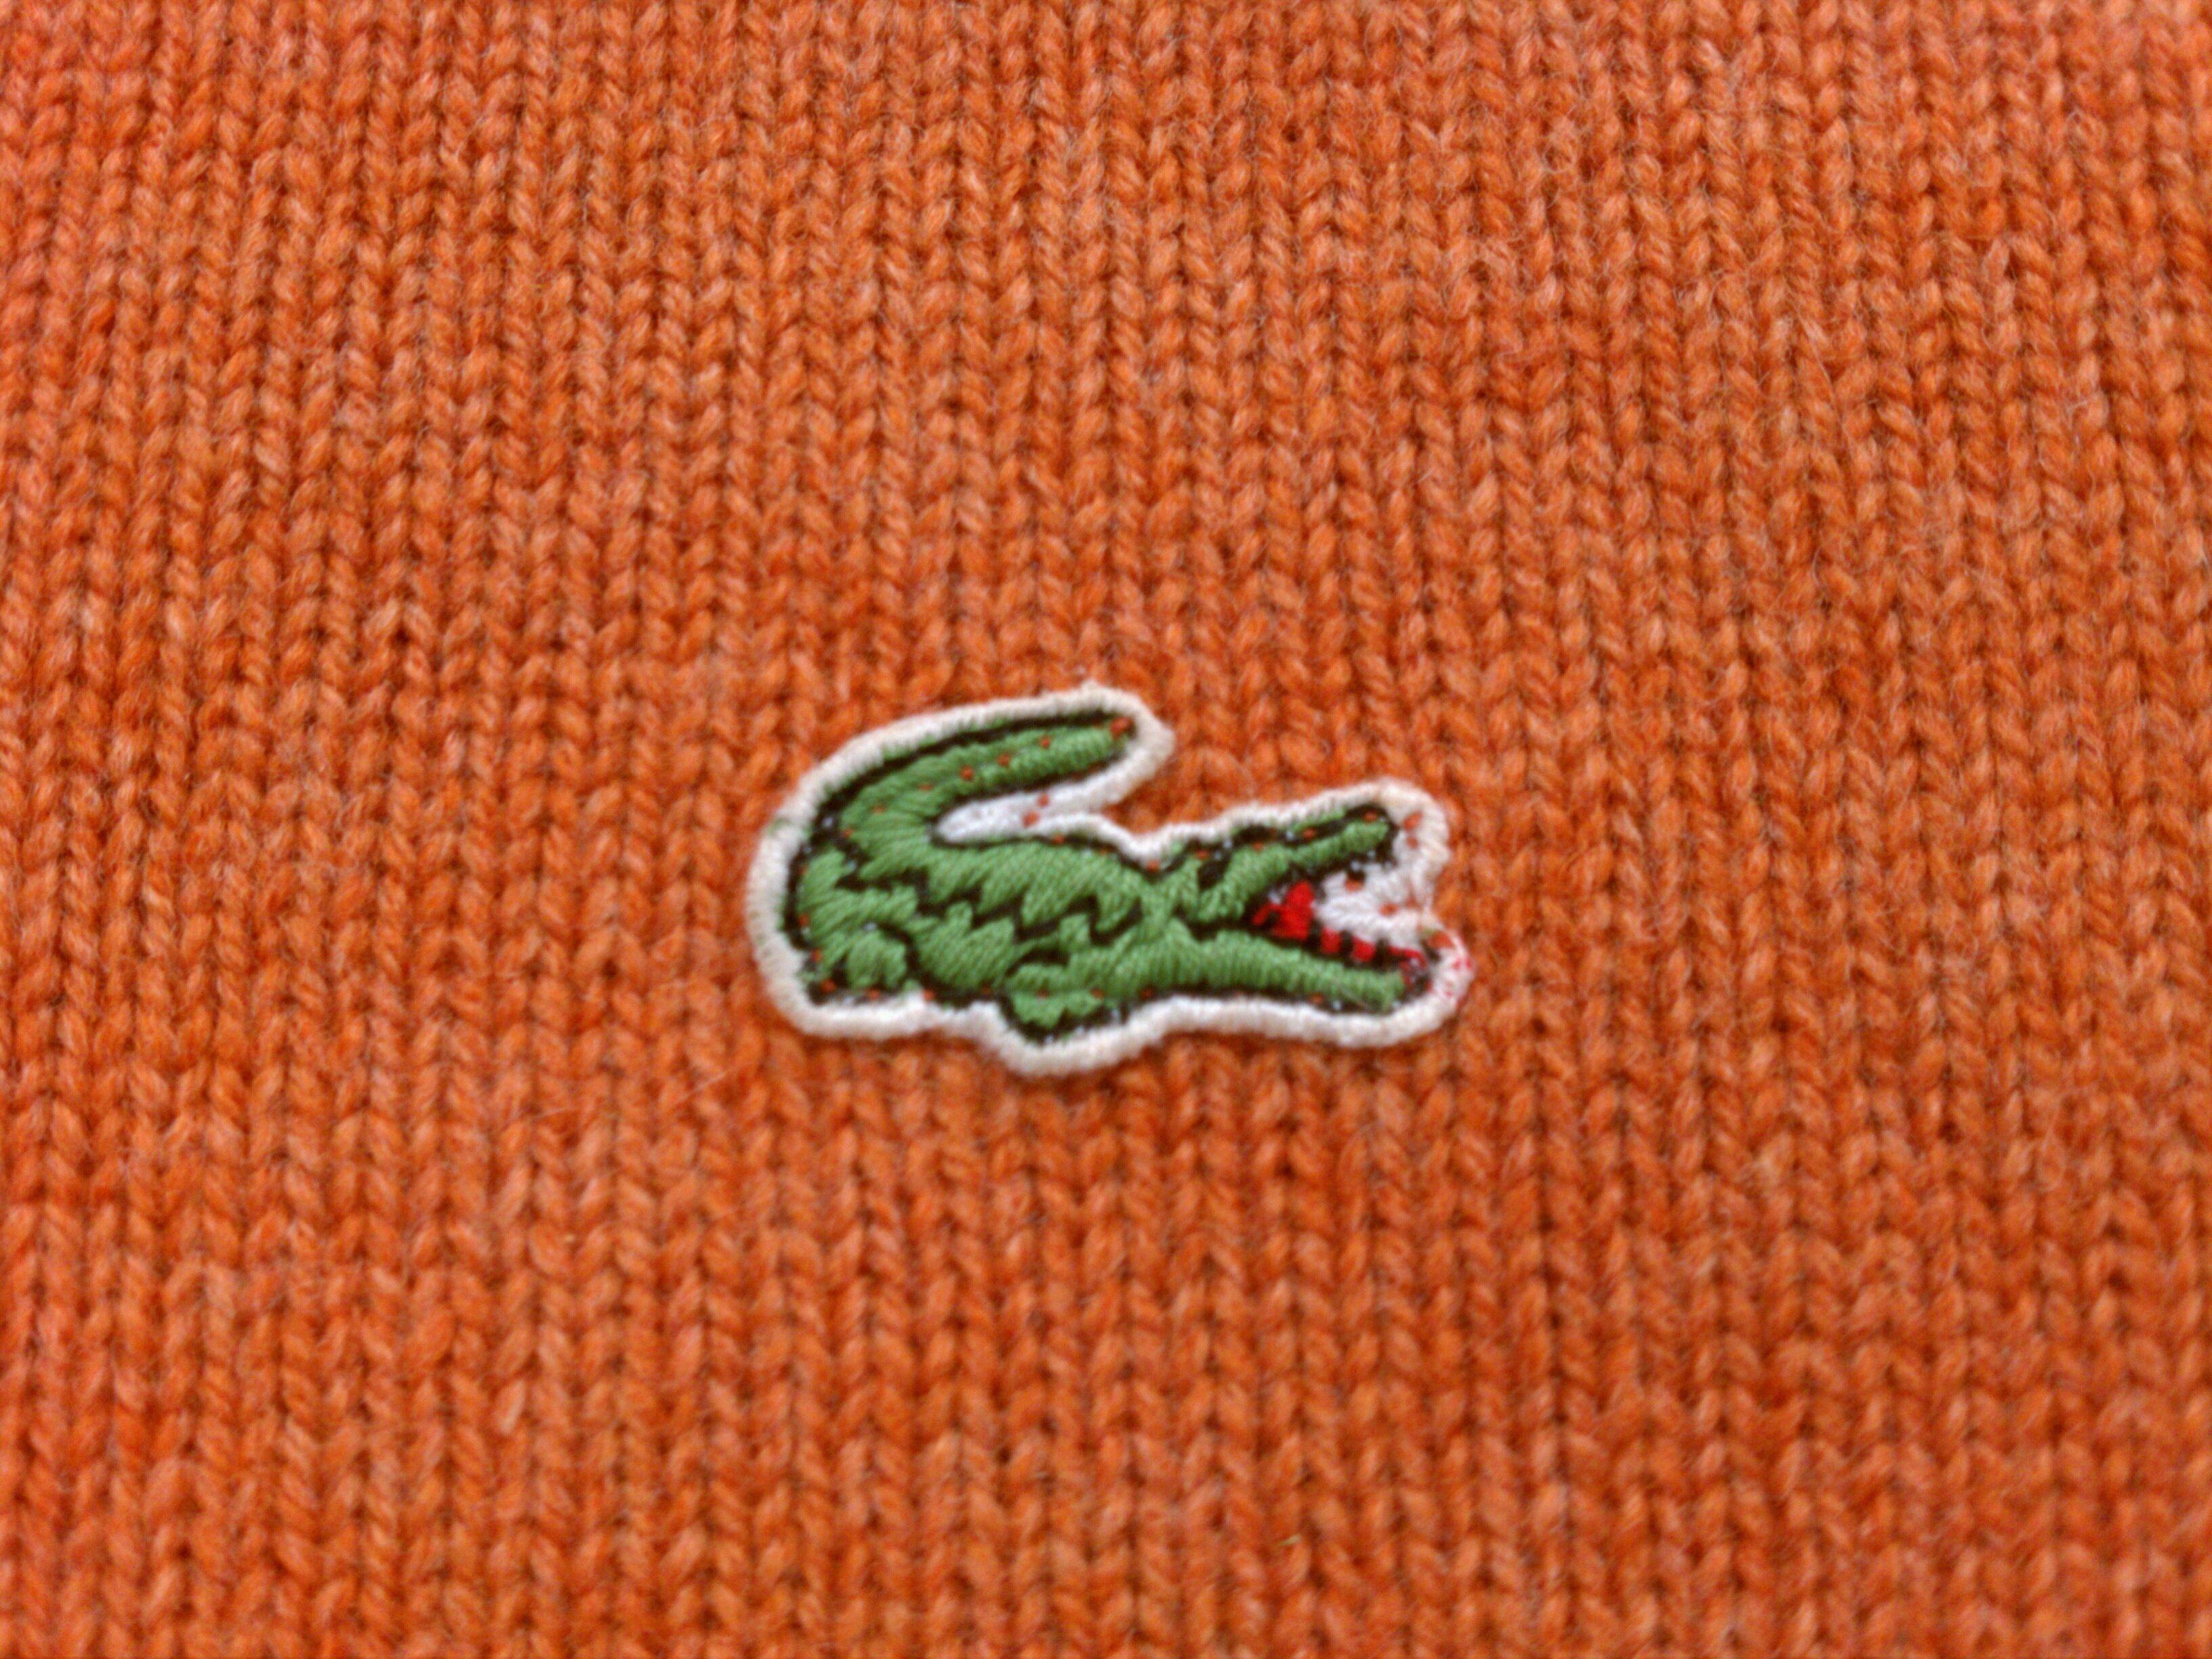 Izod Apparel Logo - Of A Crocodile In The Wrong Place | Thrift Store Preppy